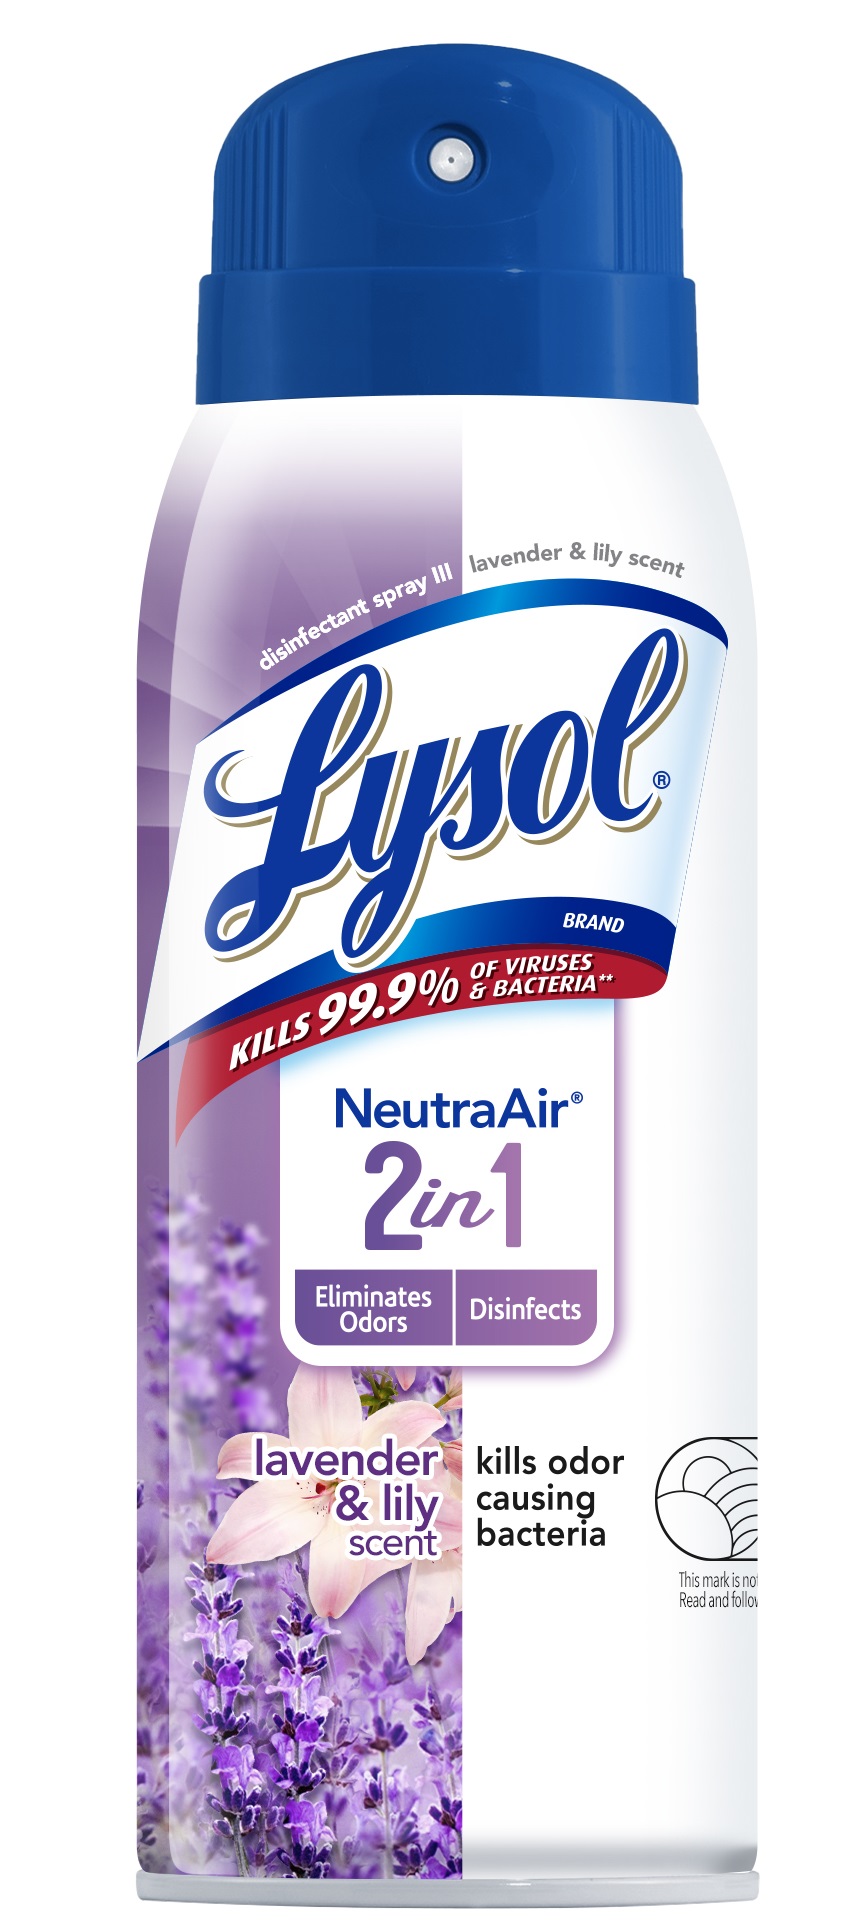 Lysol Disinfectant Spray  Neutra Air  2 in 1  Lavender  Lily